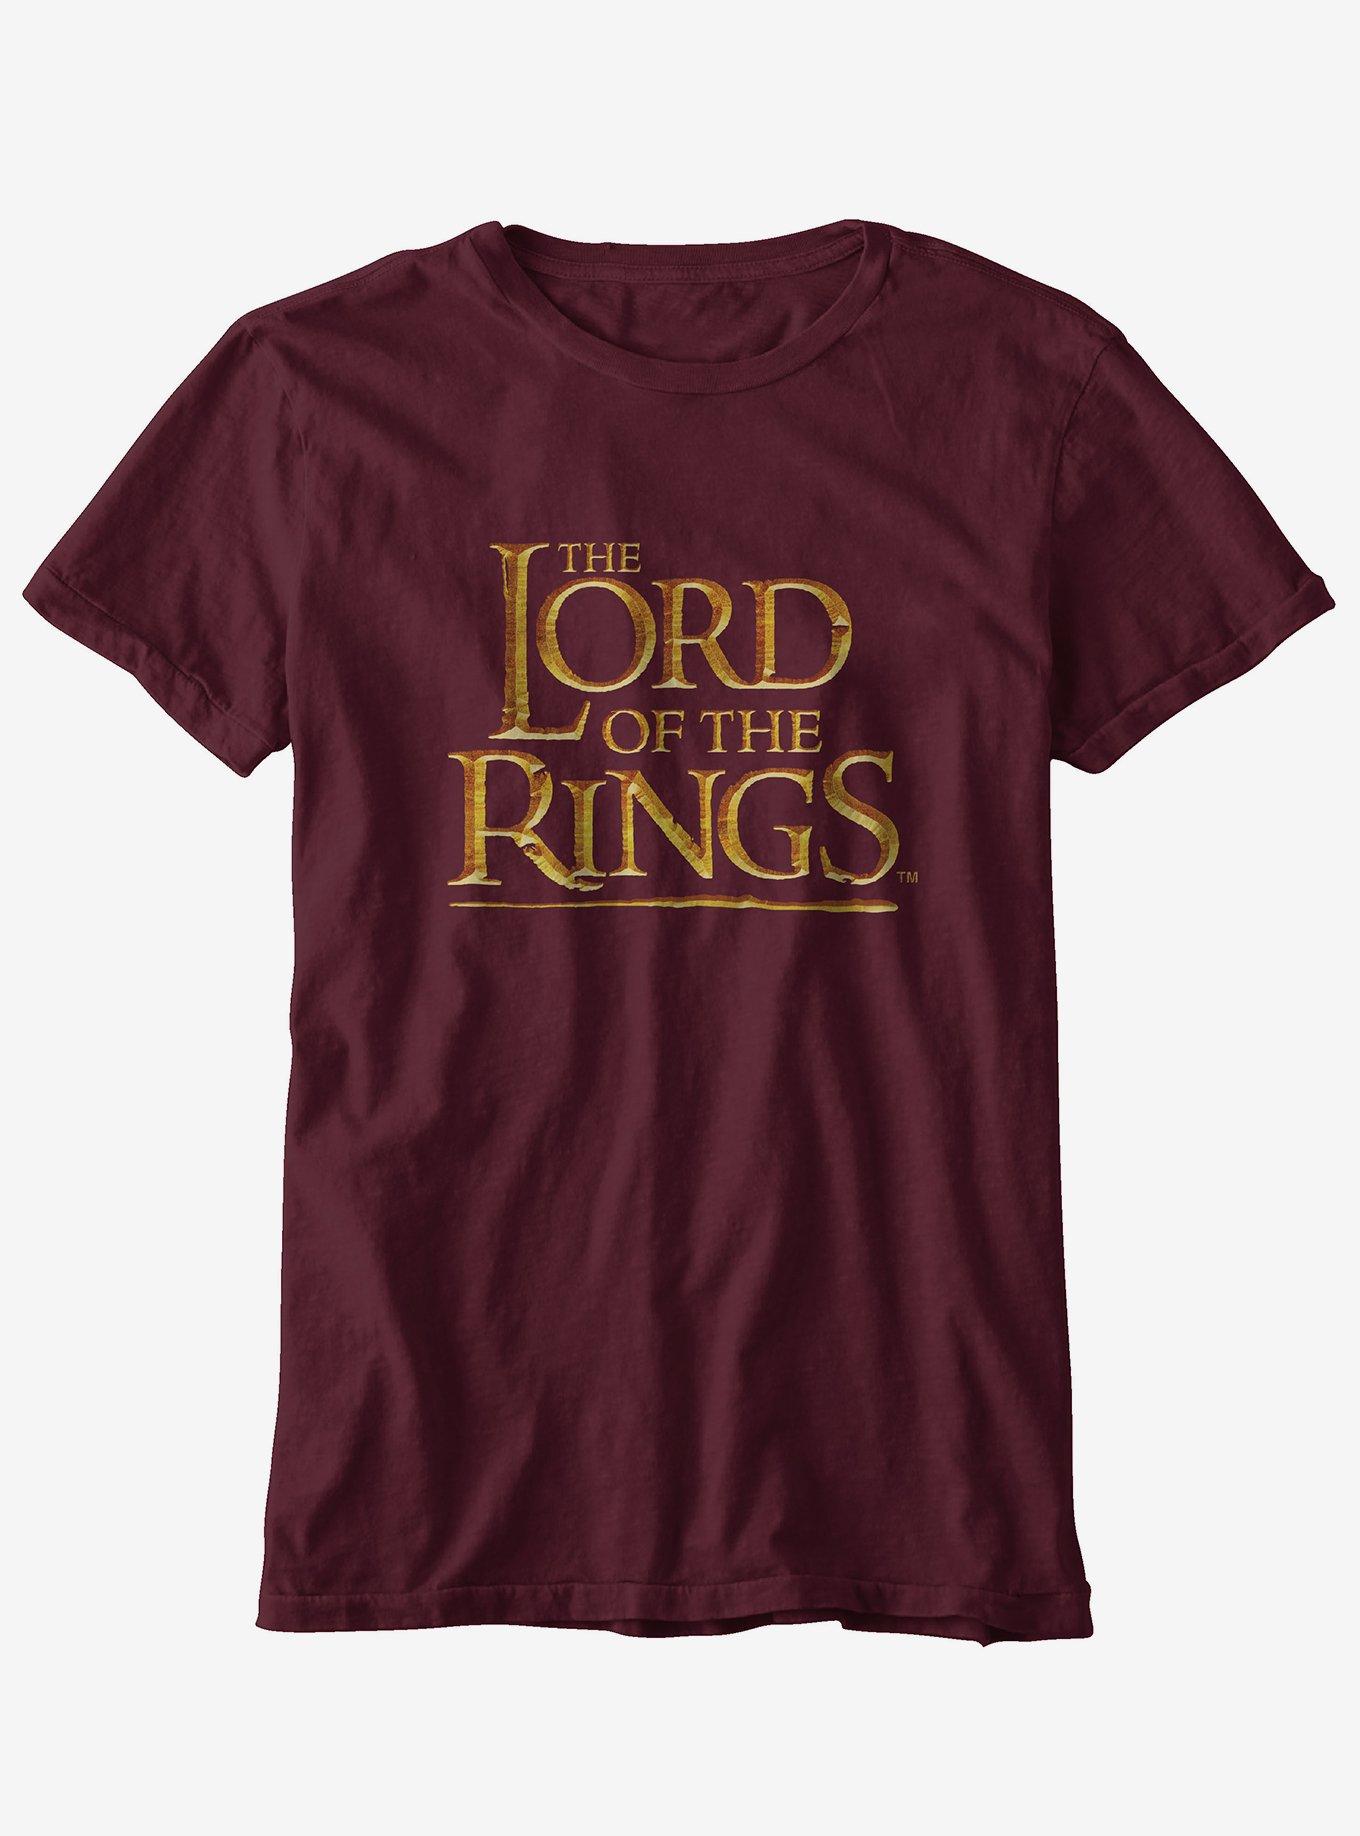 The Lord Of The Rings Logo Boyfriend Fit Girls T-Shirt, MULTI, hi-res